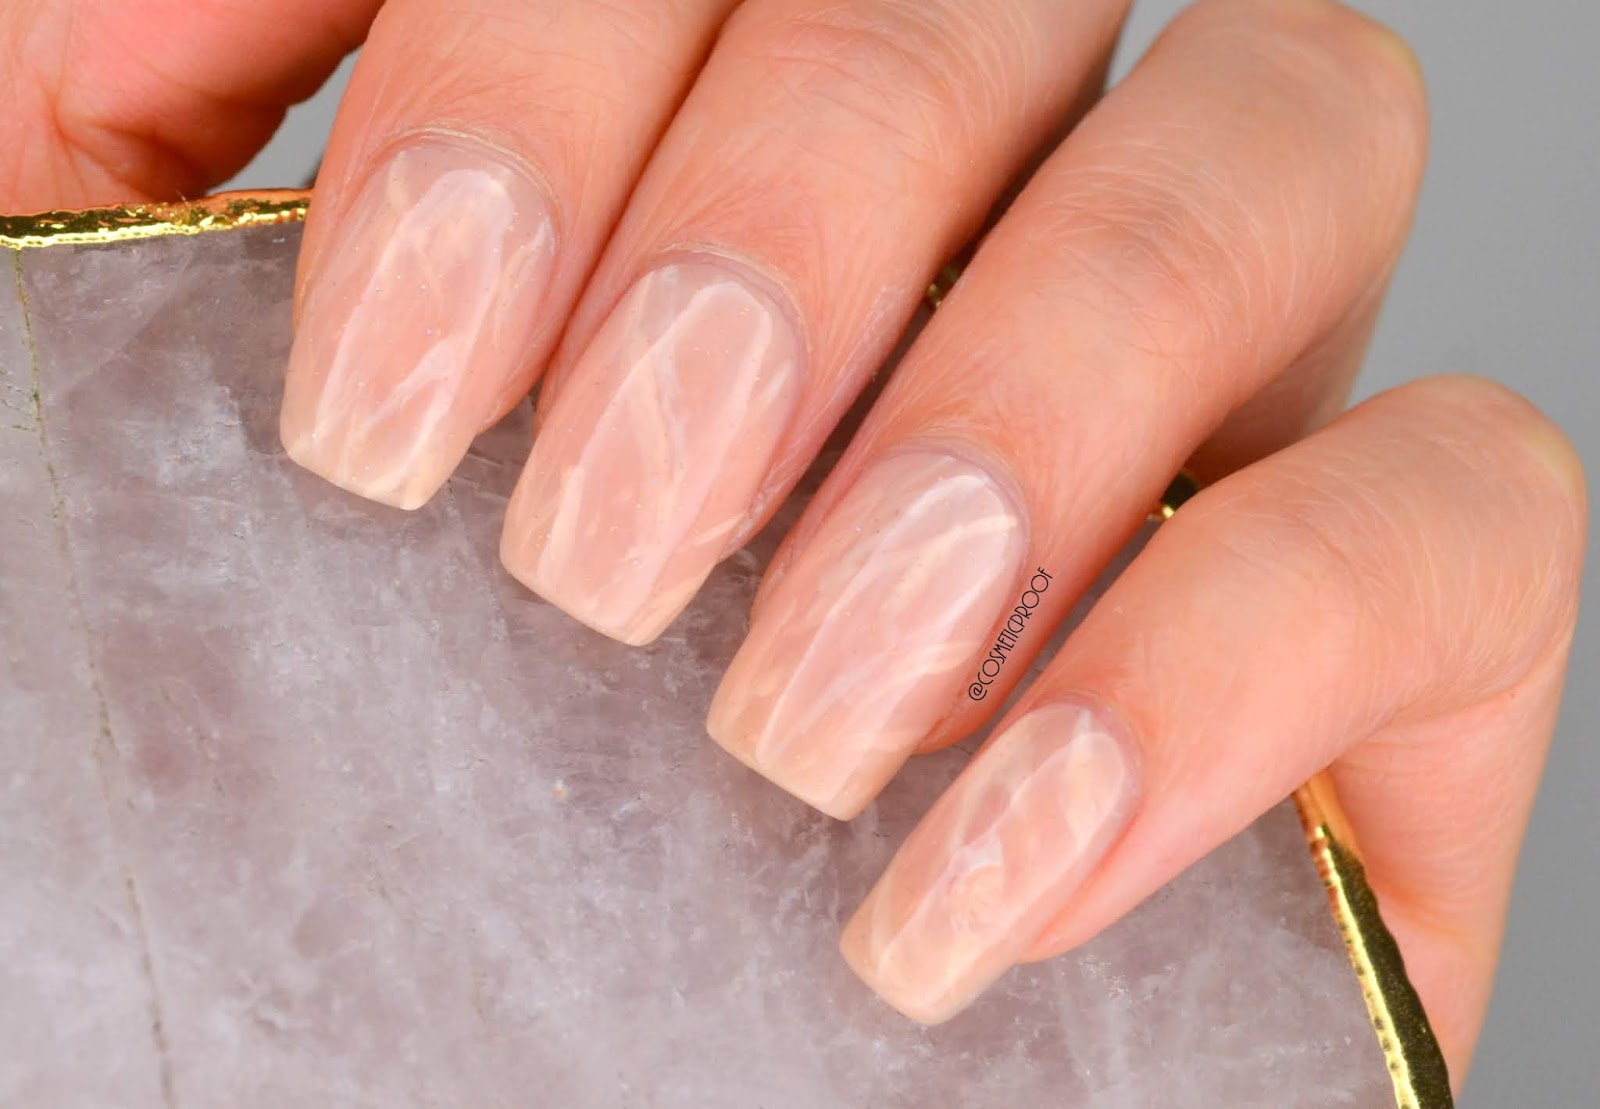 6. "Rose Quartz Nail Art with Crystal Centers" - wide 2